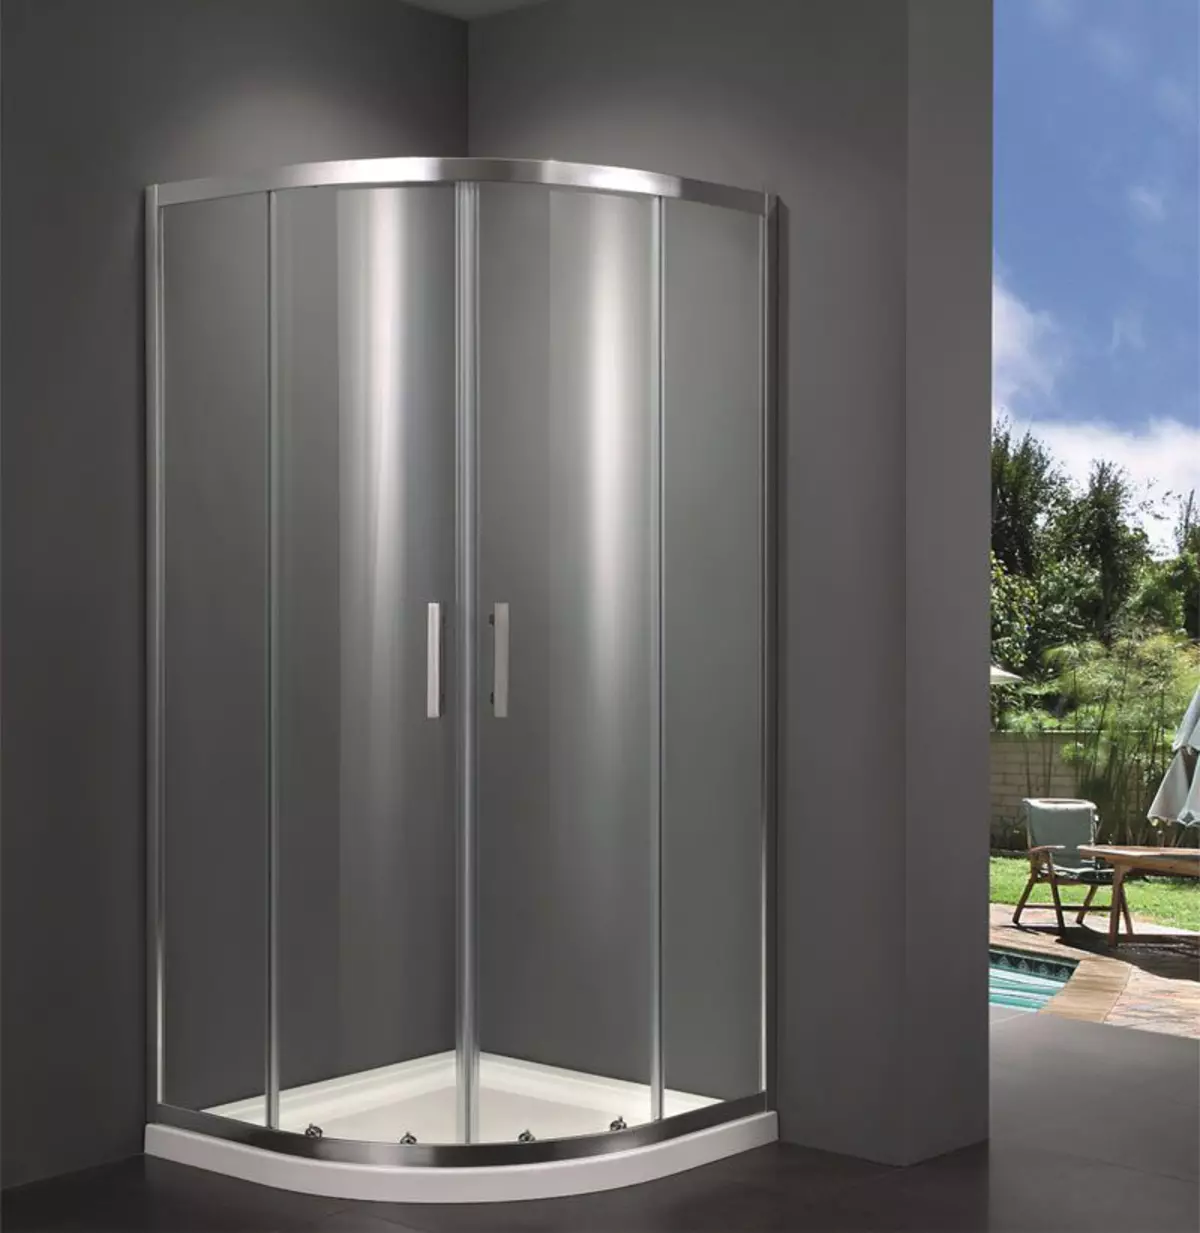 Finnish shower cabins: 80x80, 90x90 cm and other dimensions of models, Deto brands and others from Finland 10327_12